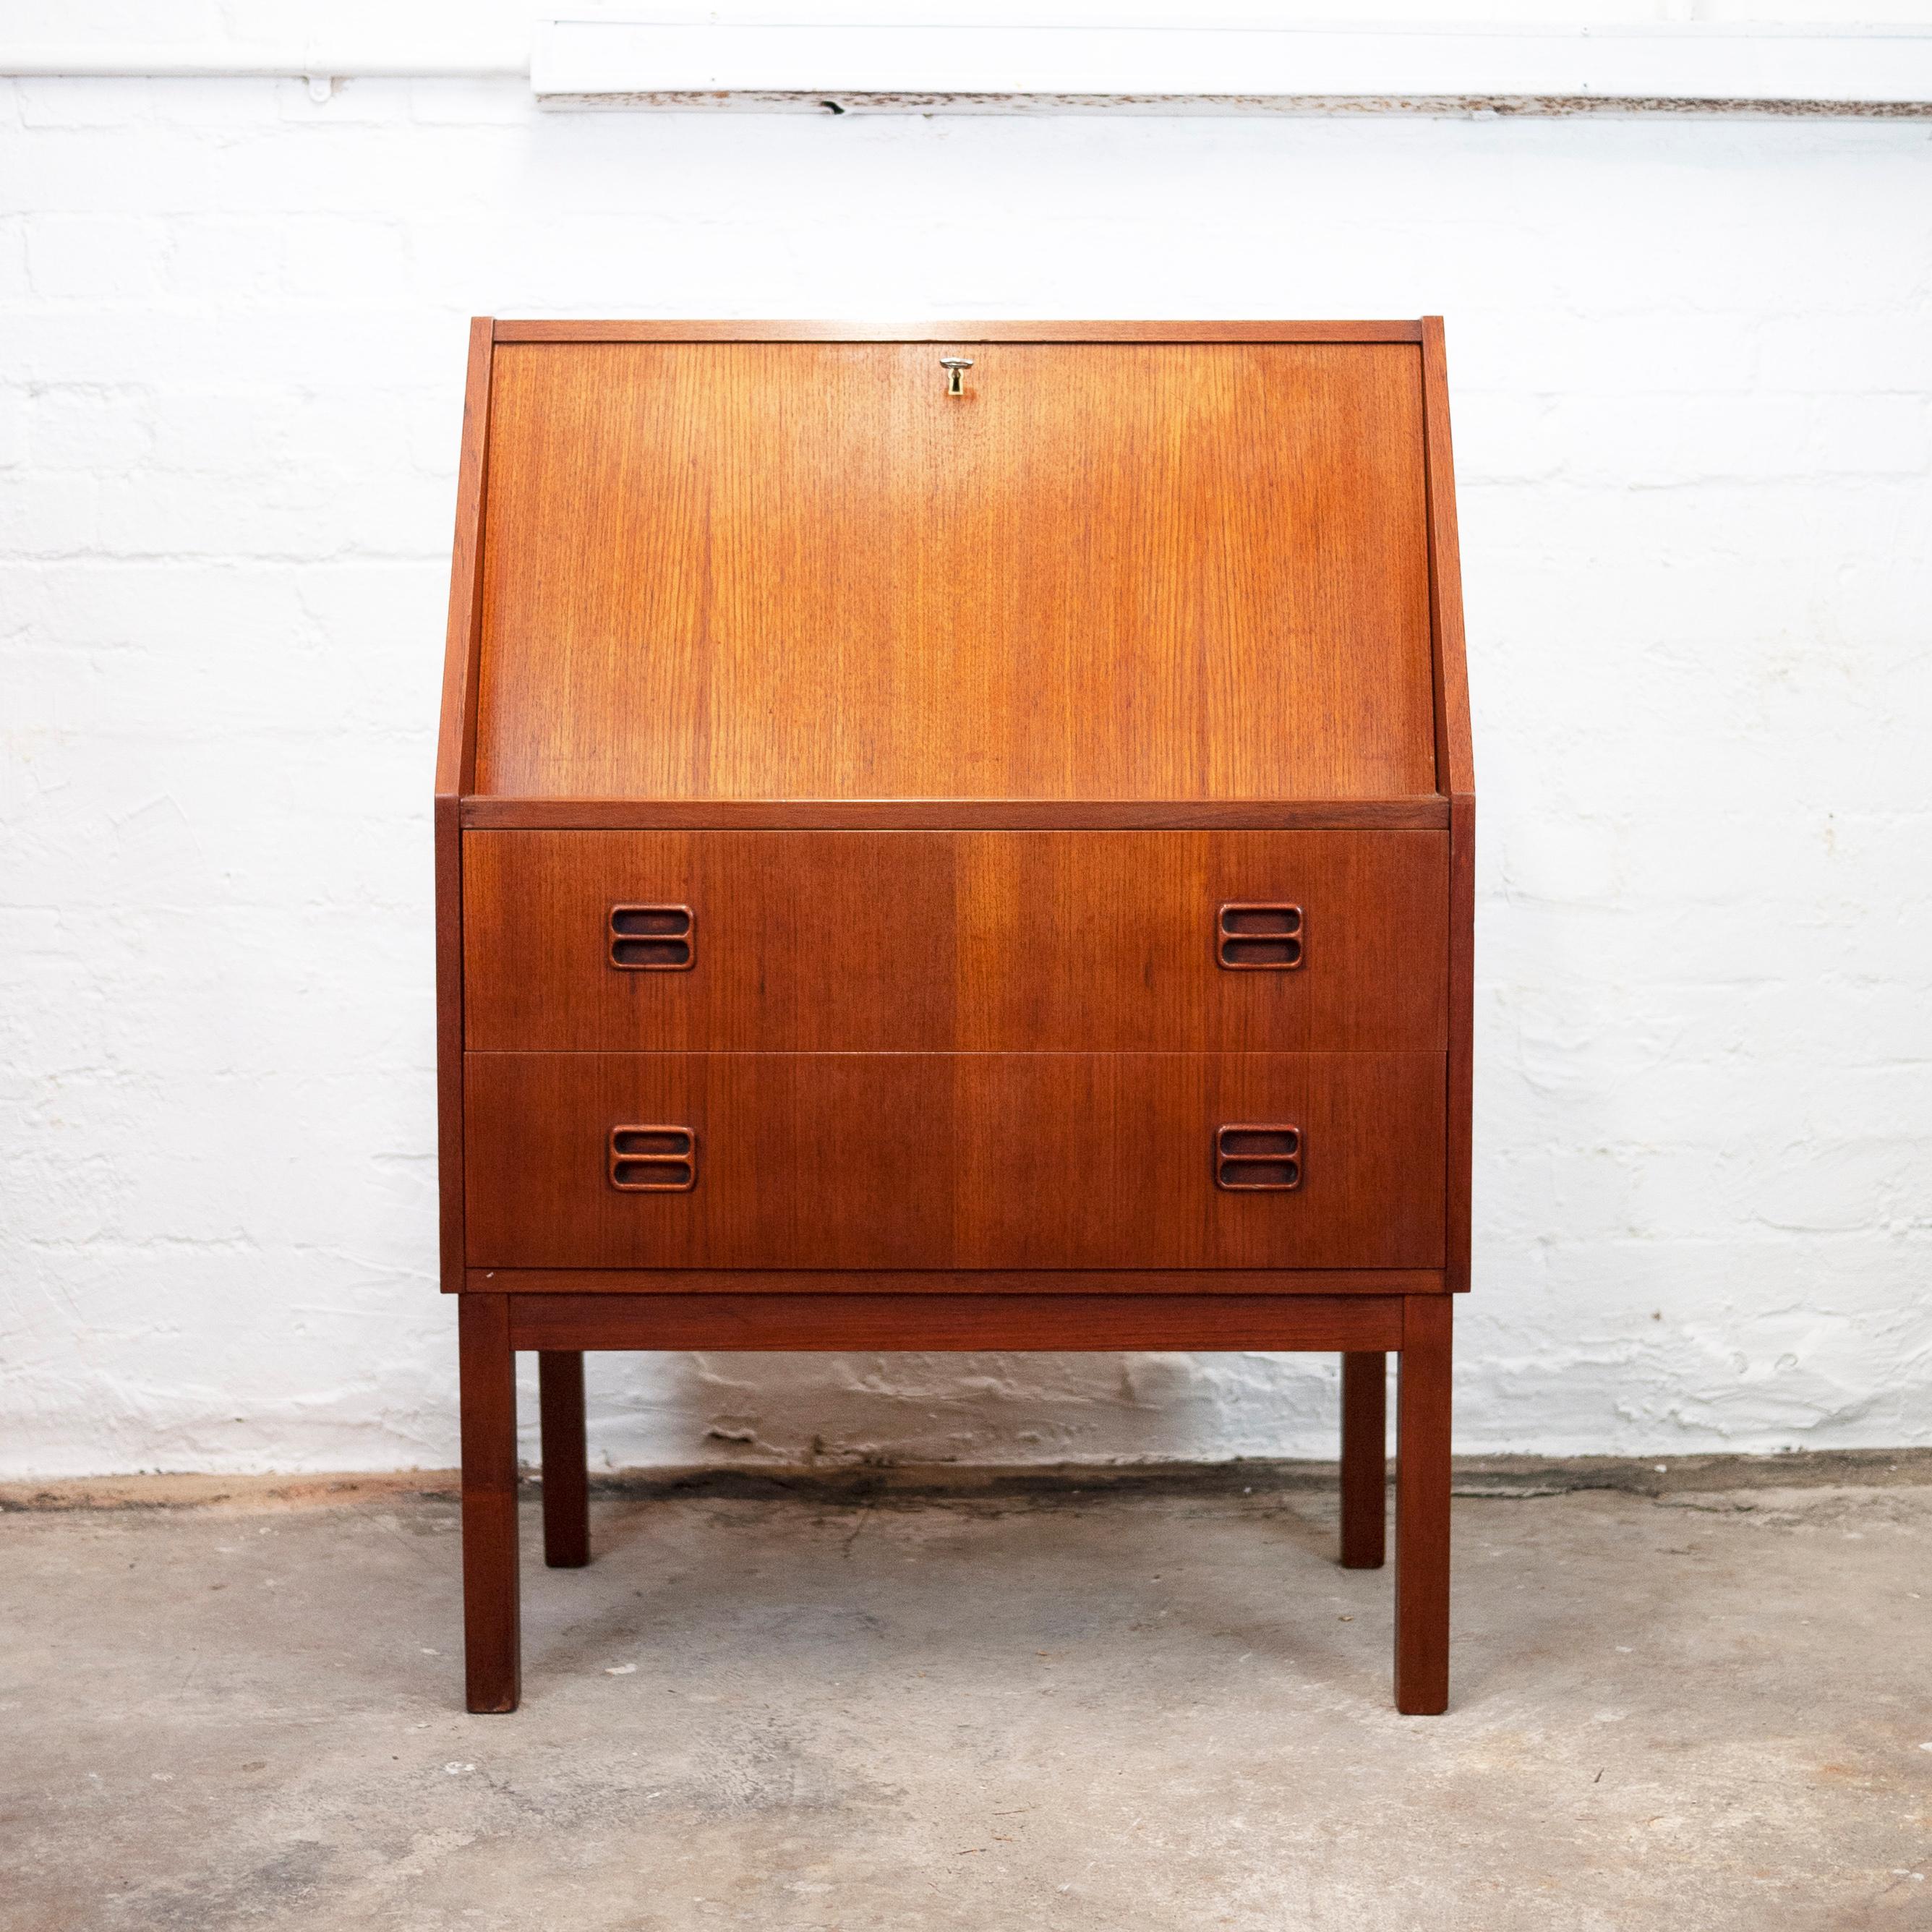 A teak Danish Bureau by Gunnar Nielsen Tibergaard, which features two drawers and a locked pull out desk with compartments.

Designer - Gunnar Nielsen Tibergaard

Design Period - 1960 to 1969

Country of Manufacture - Danish.